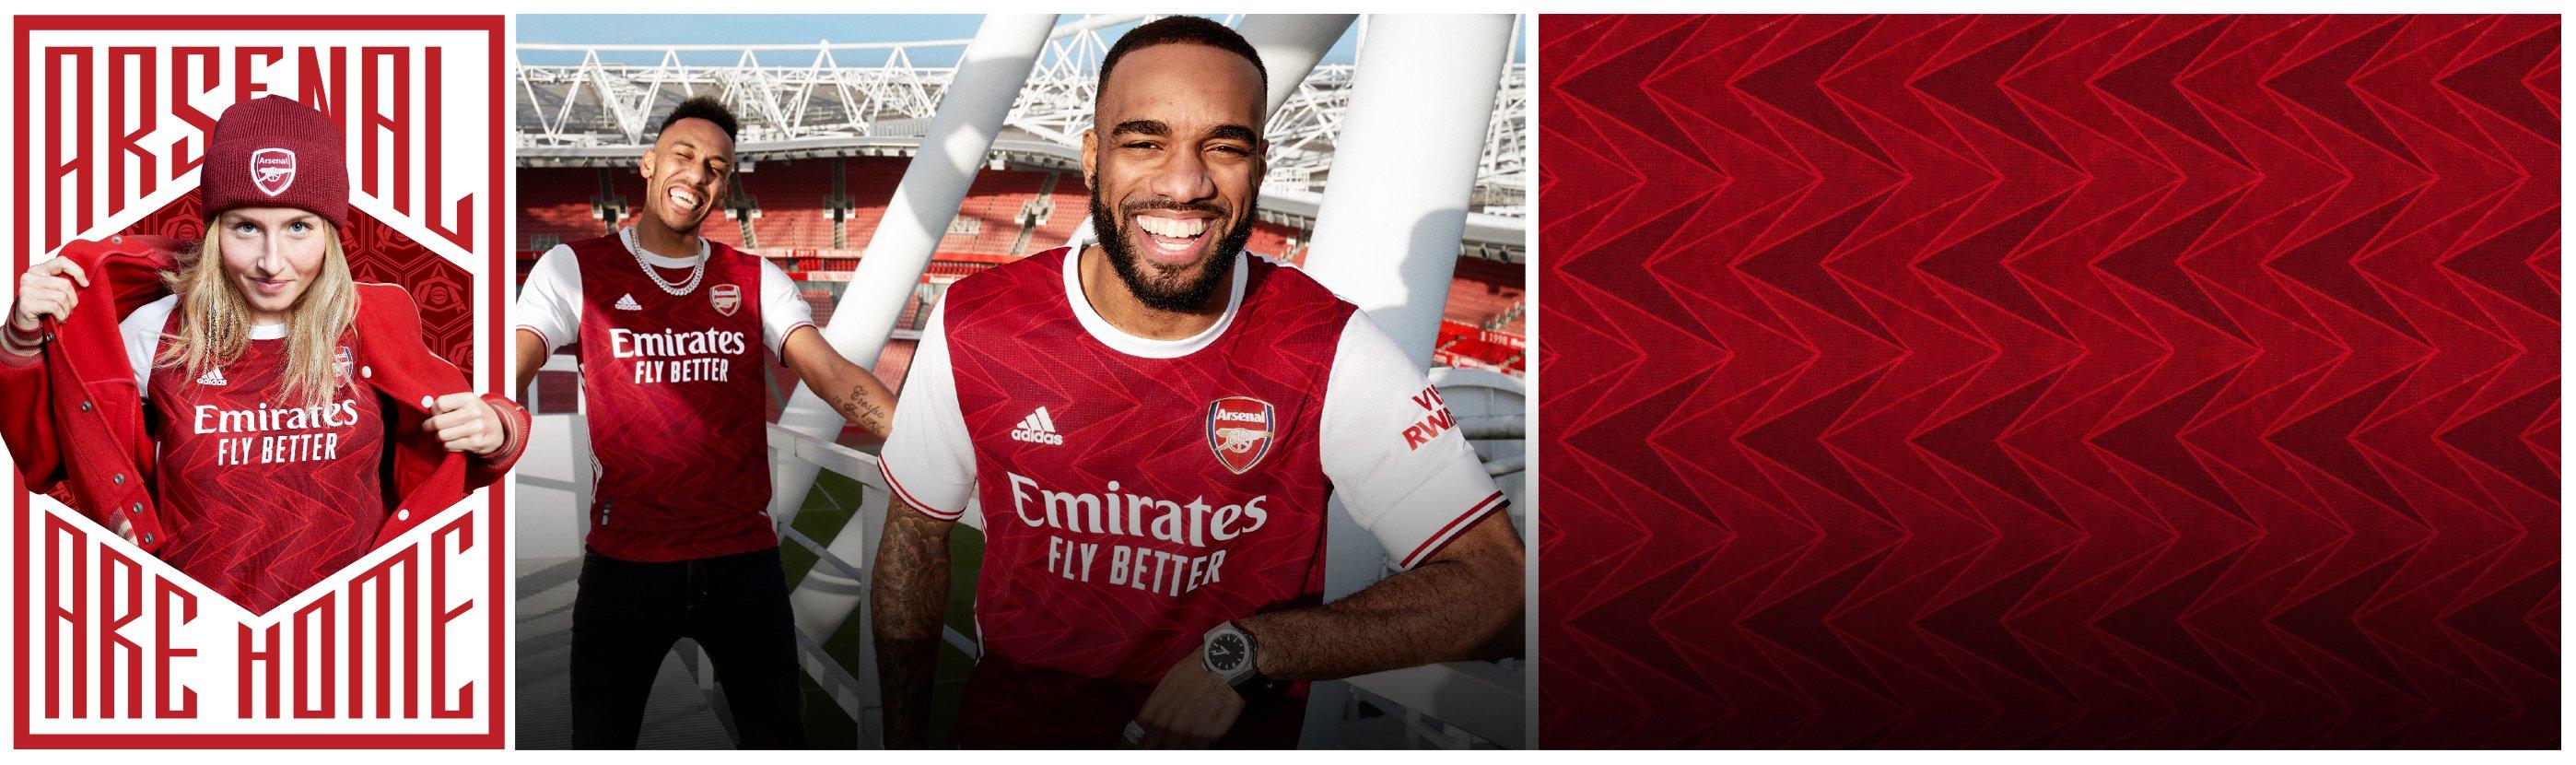 The Arsenal 20/21 Home Kit | Official 